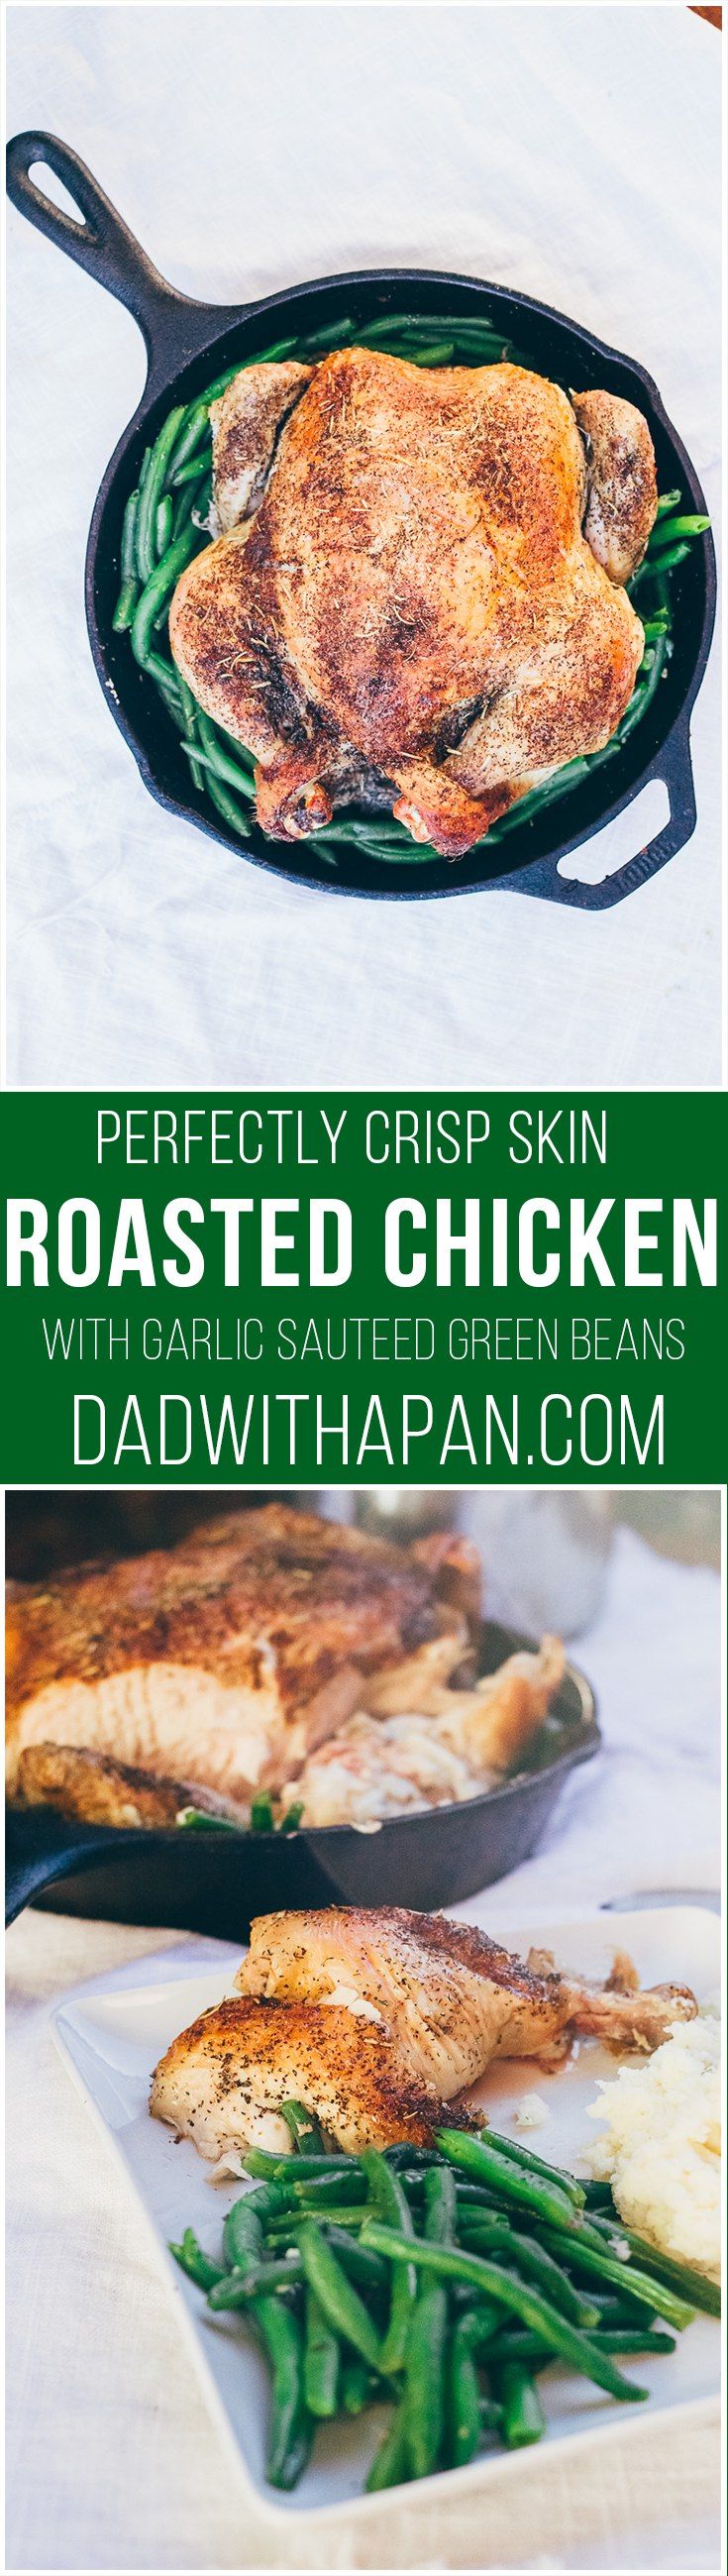 Crispy Herb Roasted Chicken with Sauteed Green Beans